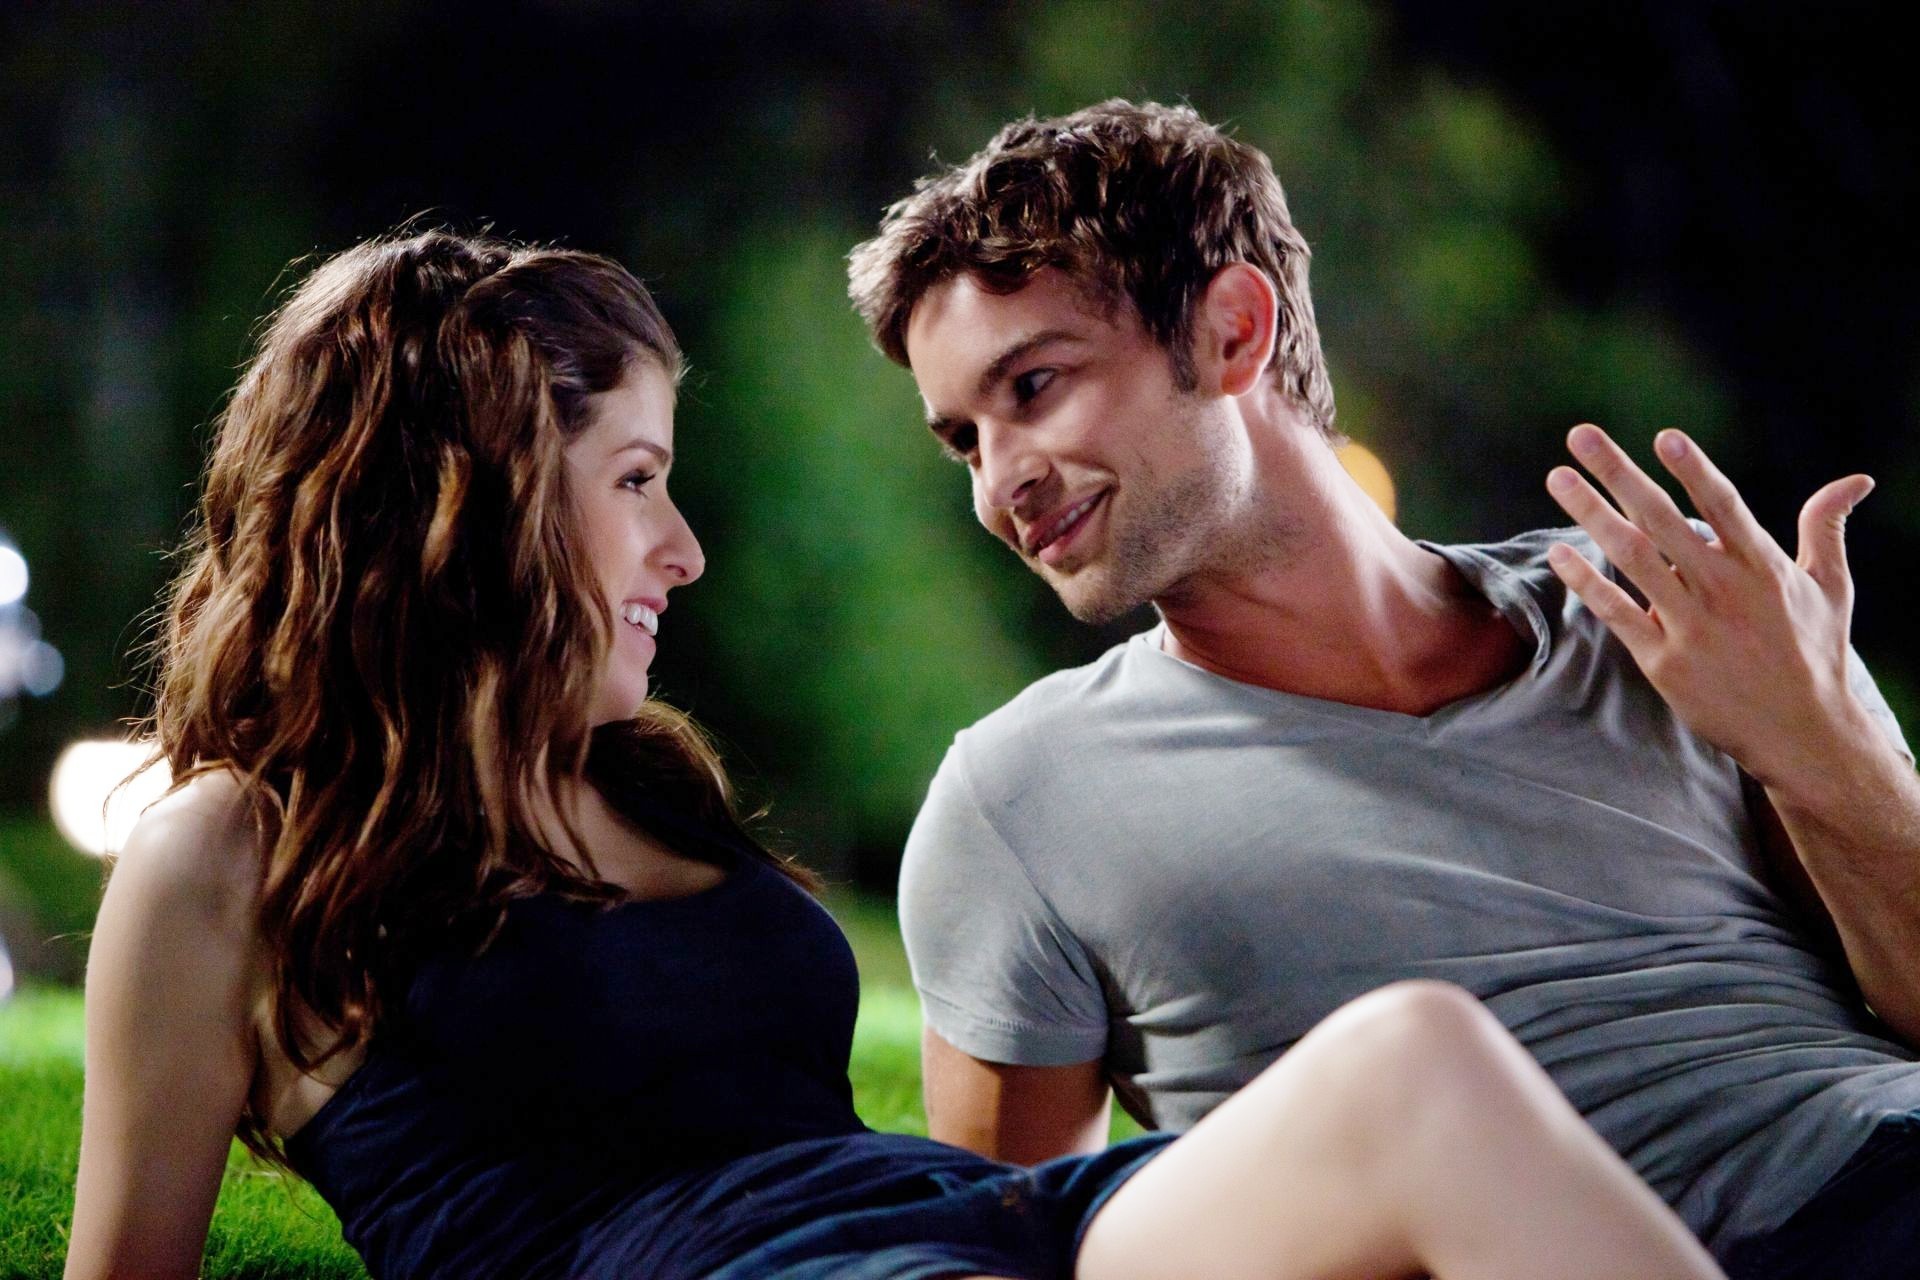 Anna Kendrick stars as Rosie and Chace Crawford stars as Marco in Lionsgate Films' What to Expect When You're Expecting (2012). Photo credit by Melissa Moseley.